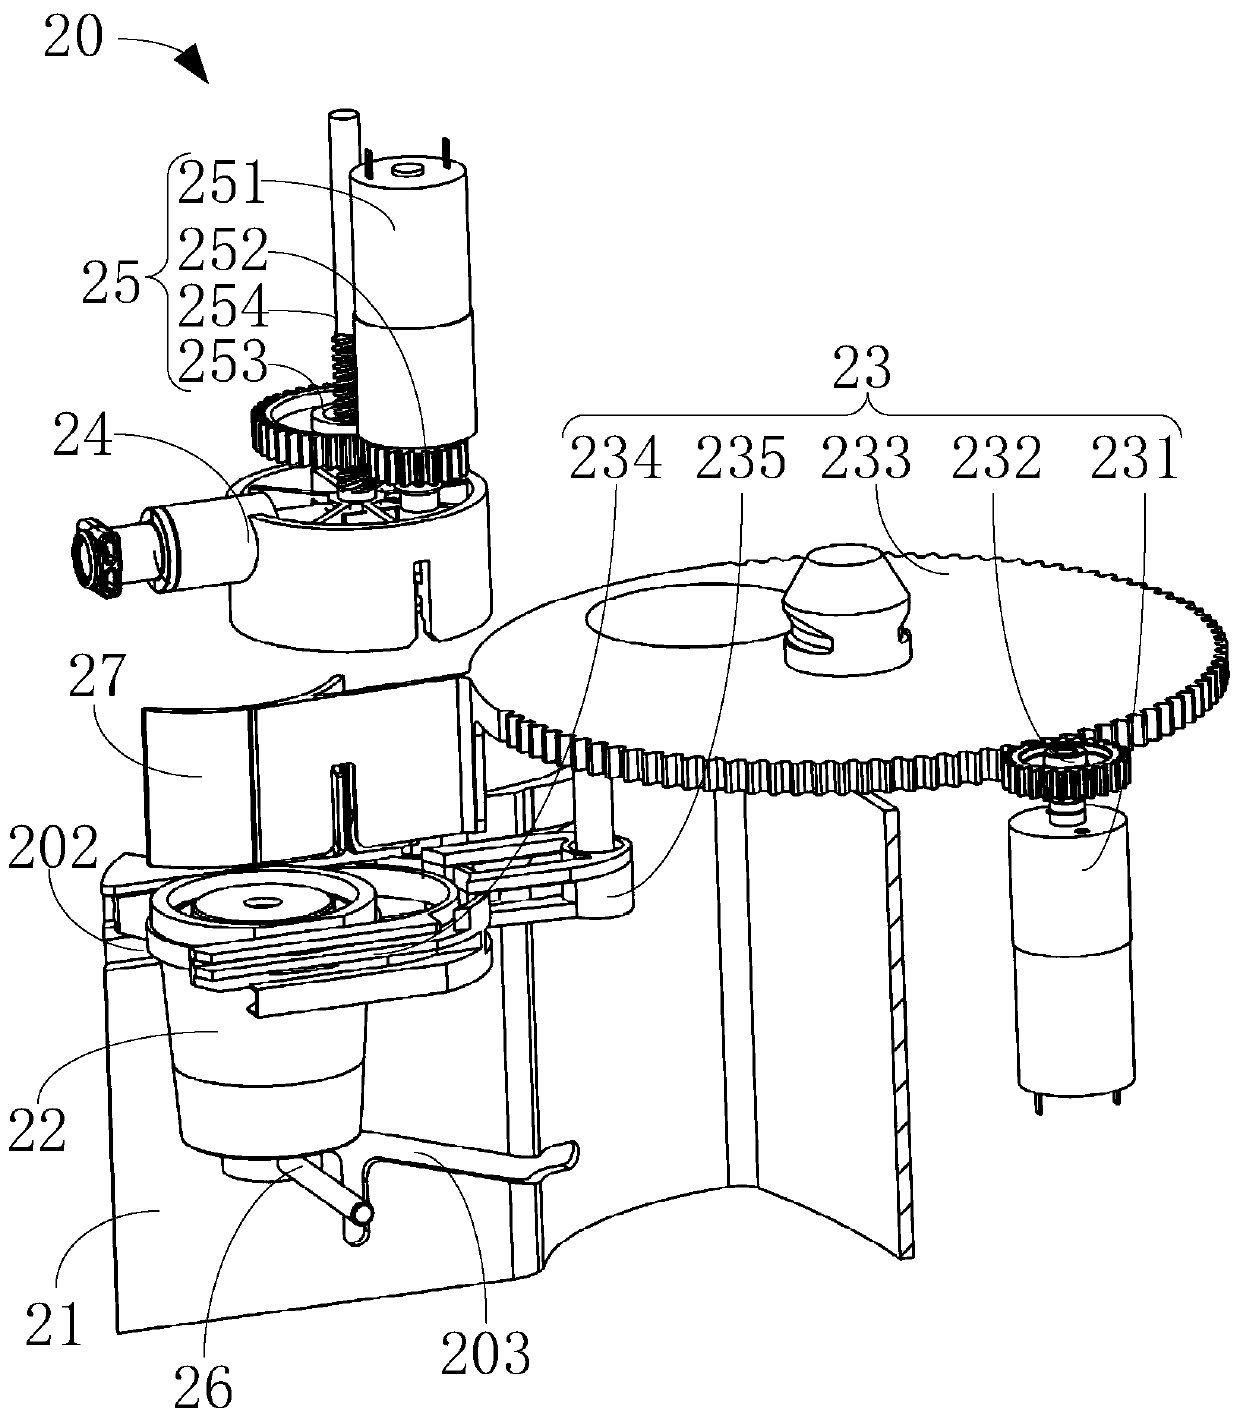 Brewing device and beverage machine